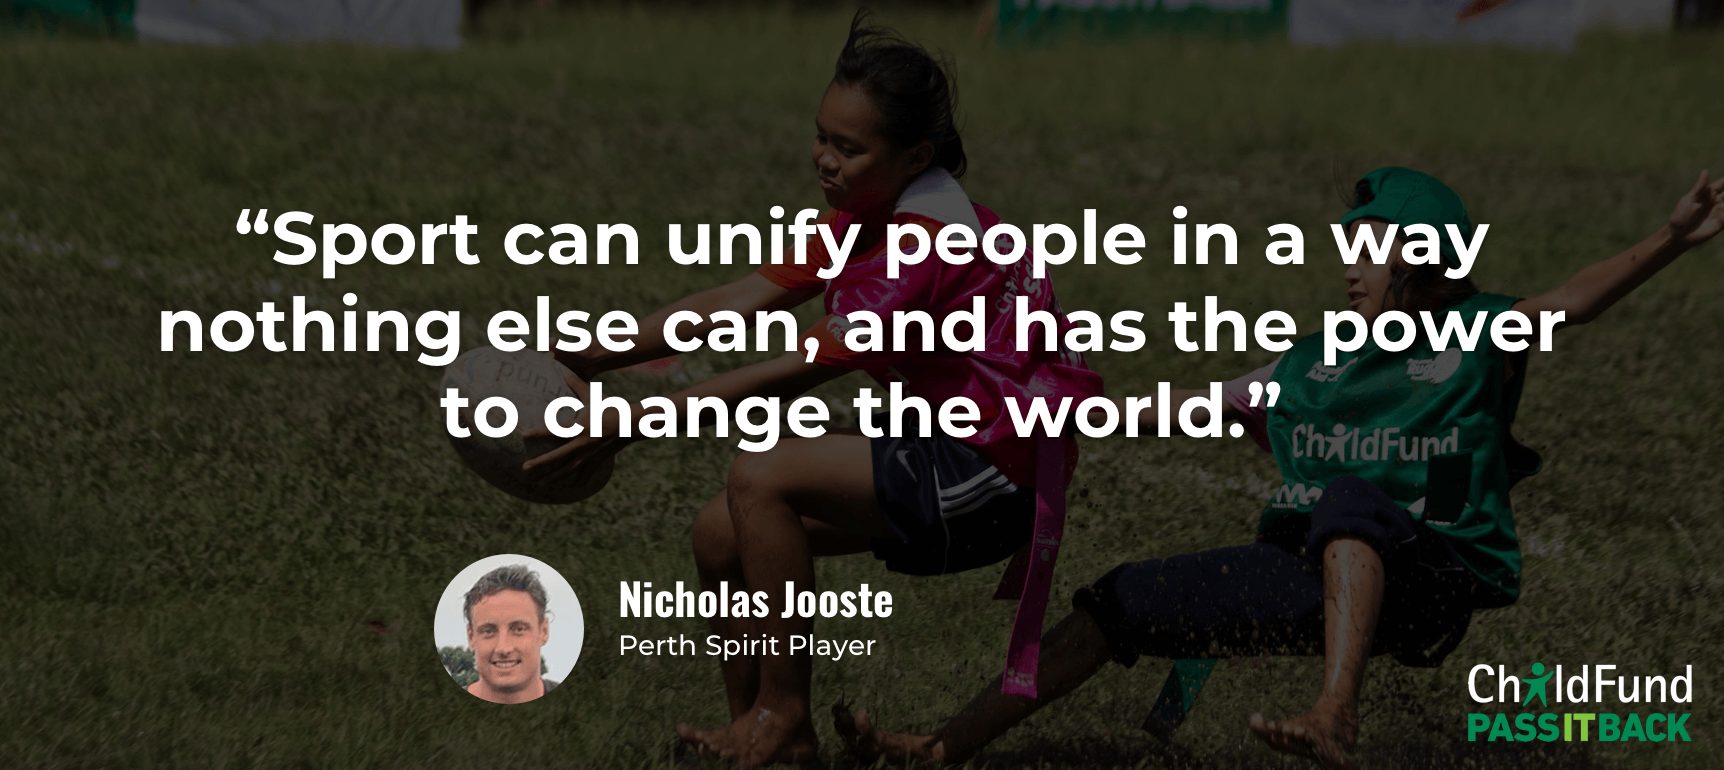 Does sport have the power to change the world? | ChildFund Pass It Back